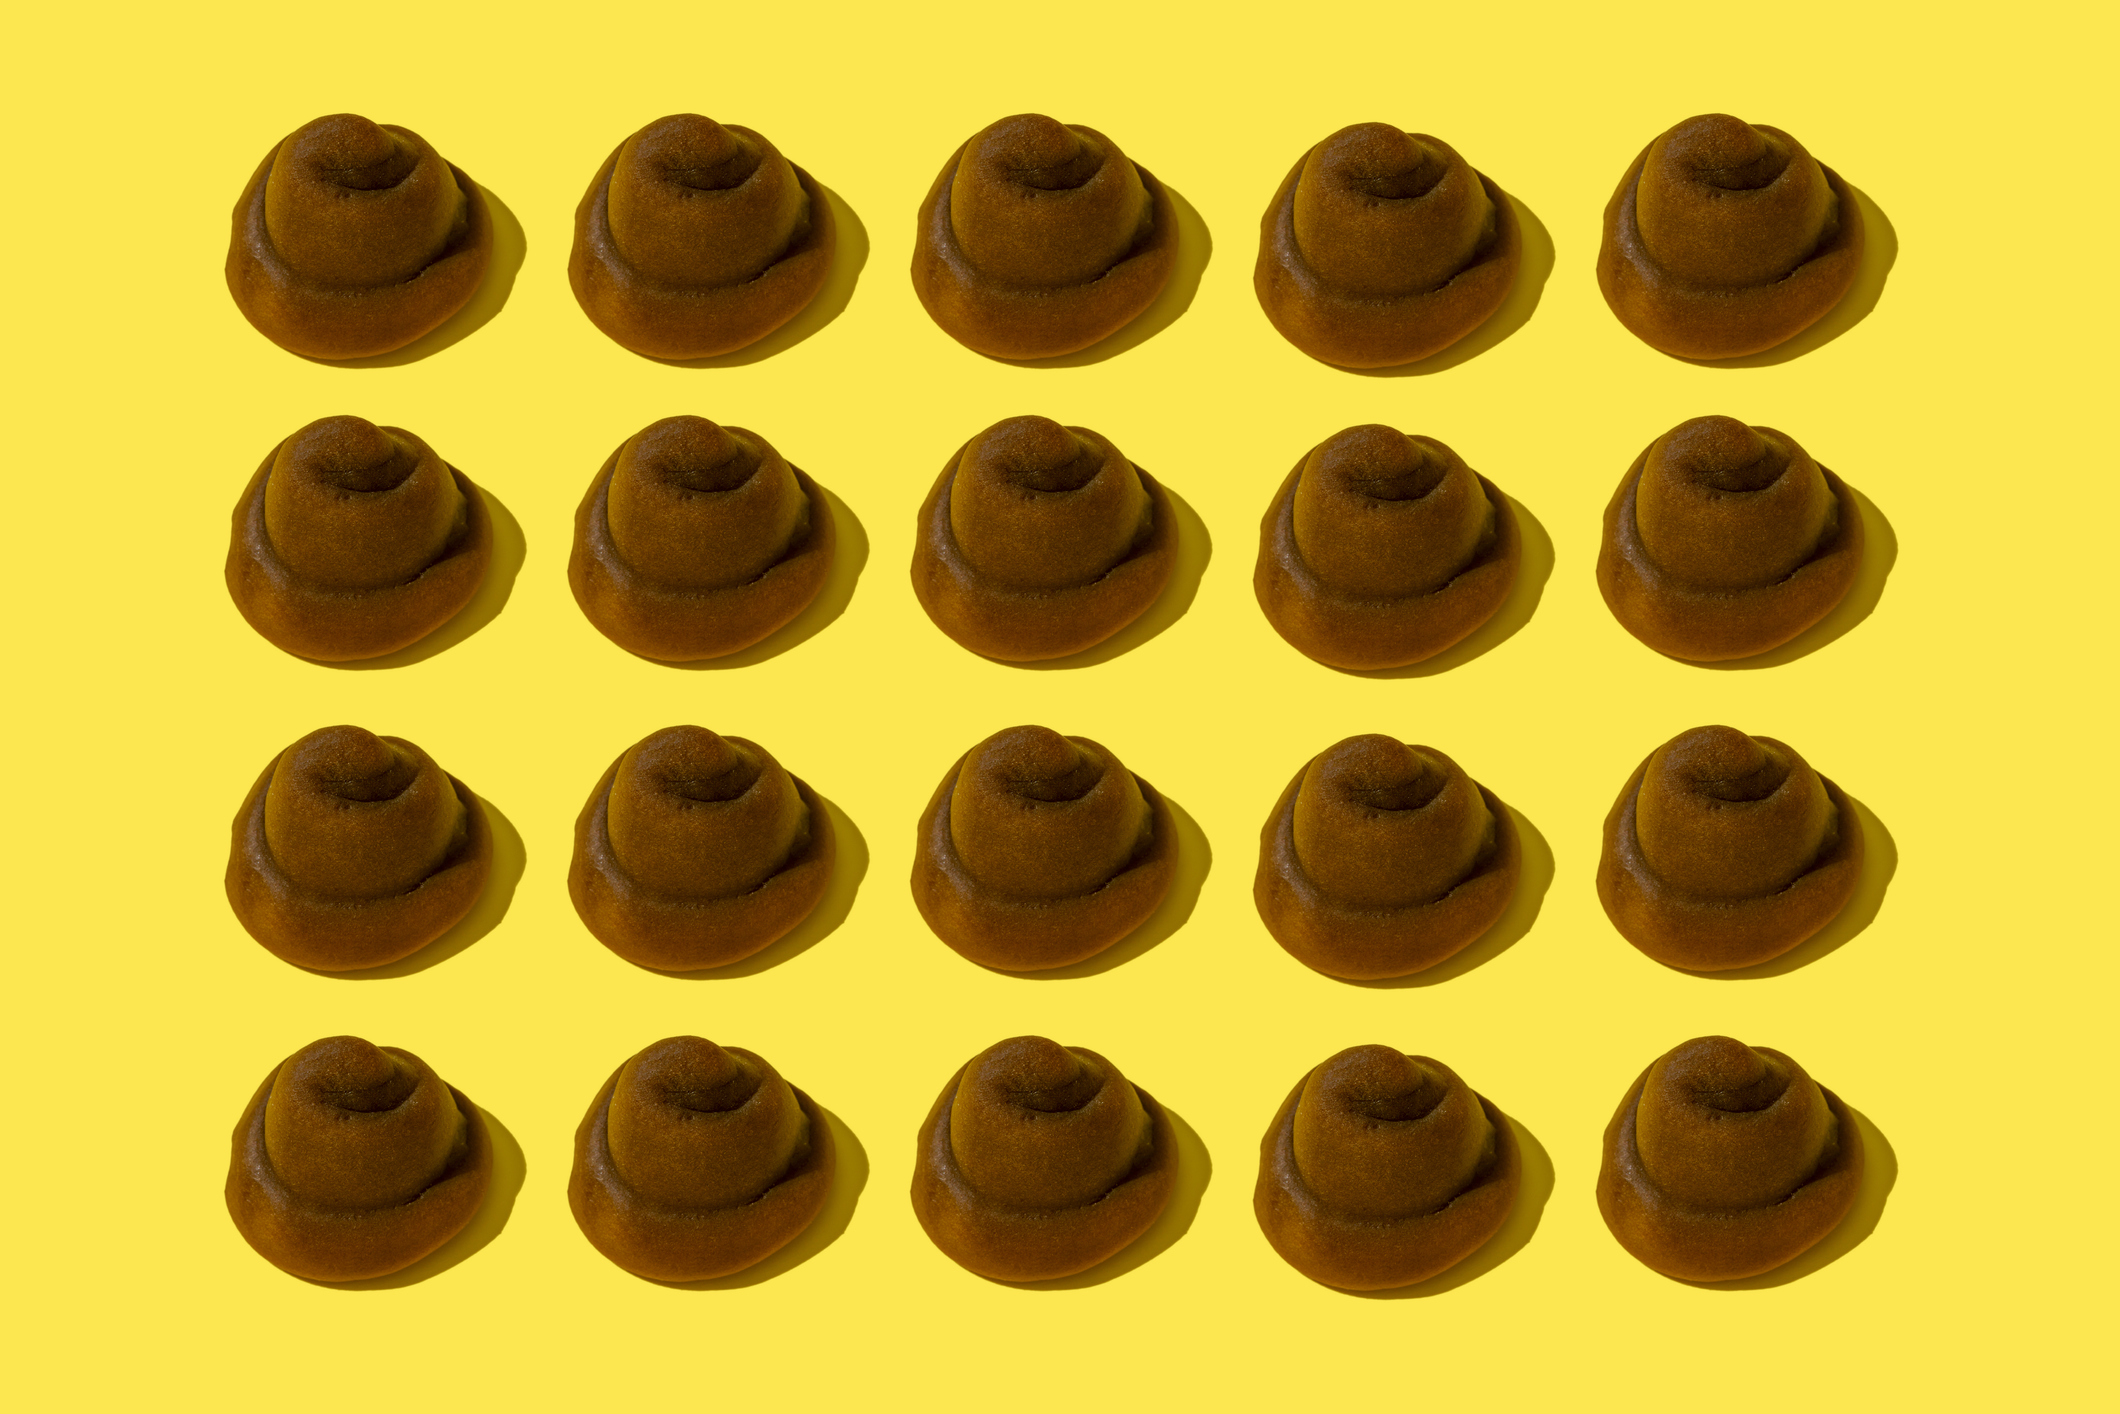 Multiple brown felt hats arranged in a grid pattern on a yellow background